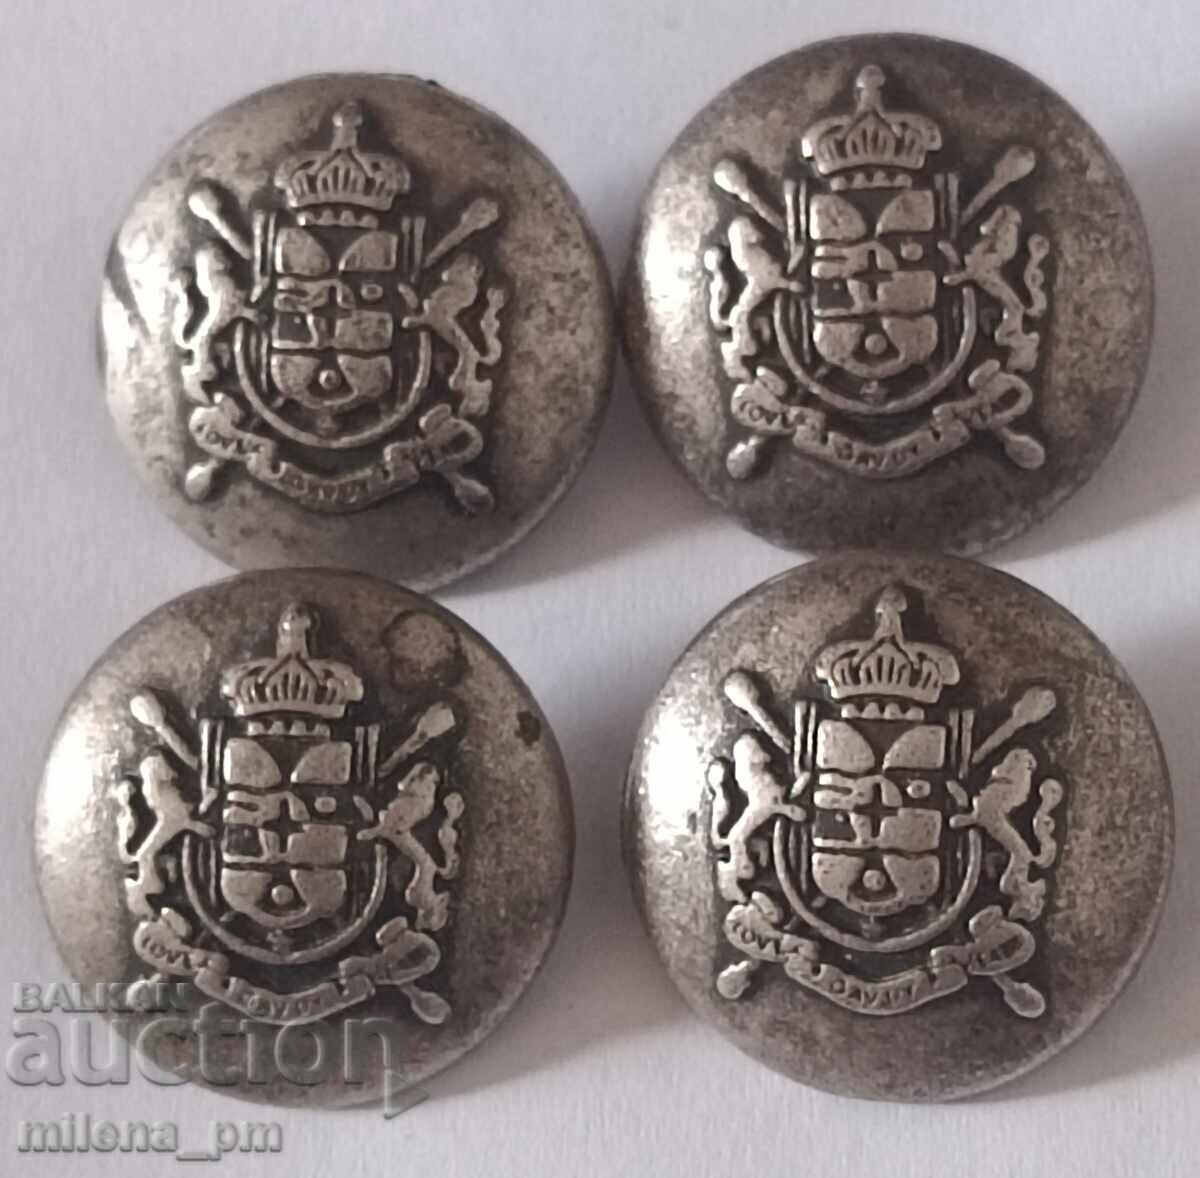 Lot of four military buttons